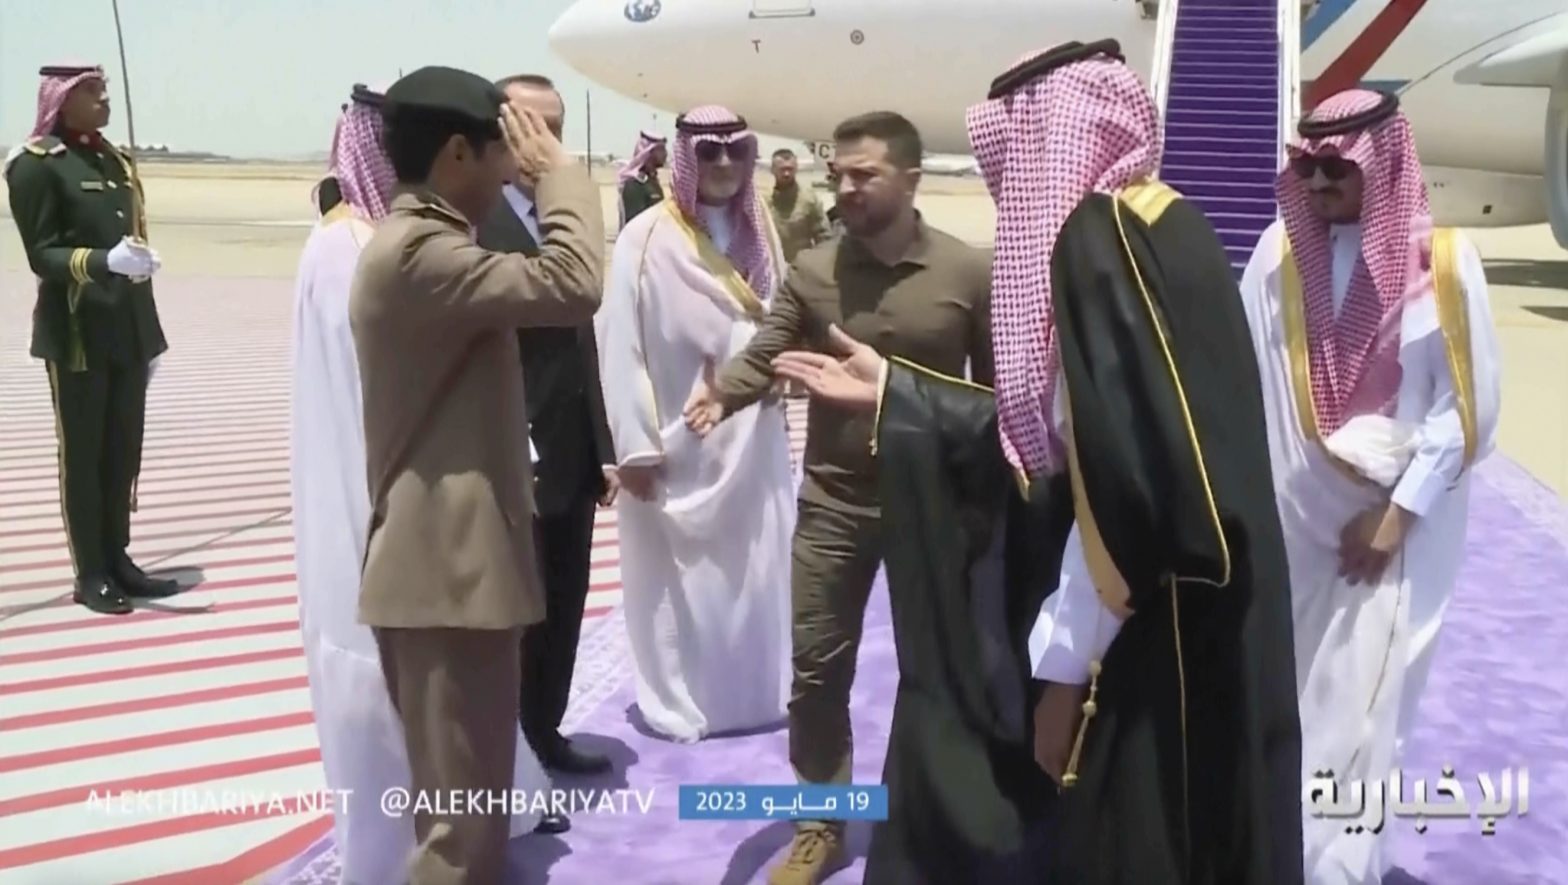 Zelenskyy Attends Arab Summit in Saudi Arabia, Where Many Leaders Are Close to Moscow